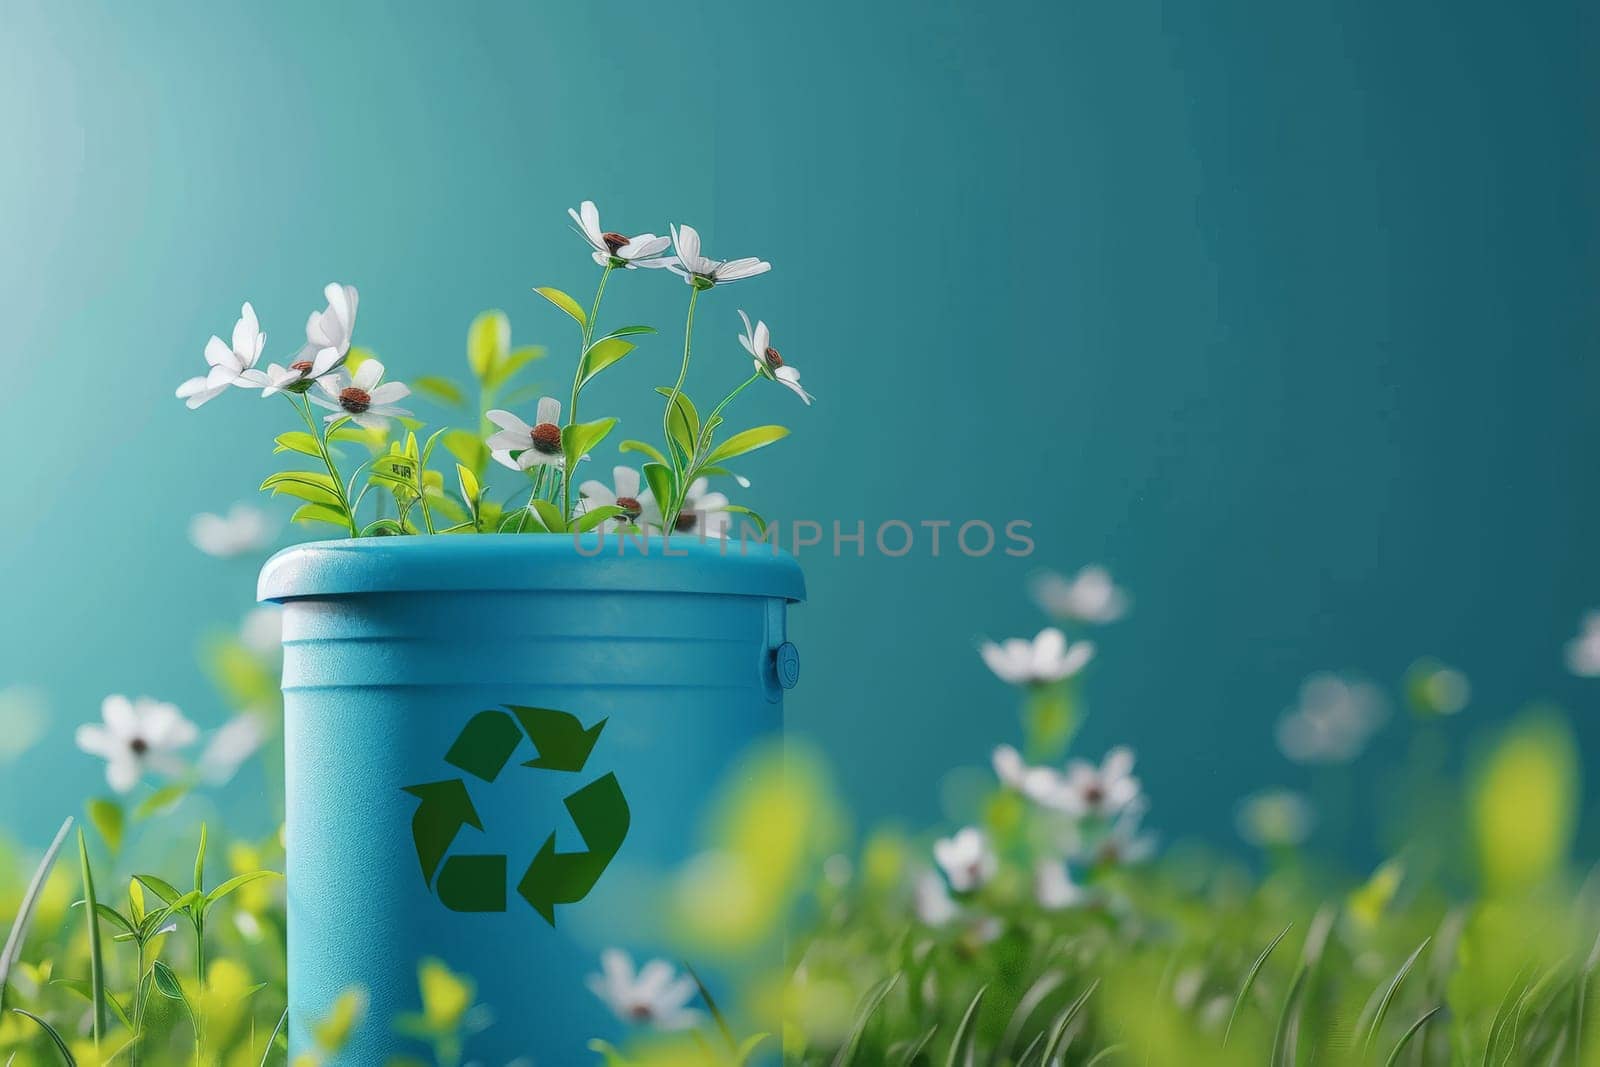 A blue container with a white flower on it and the word recycle on it. The container is surrounded by green grass and flowers